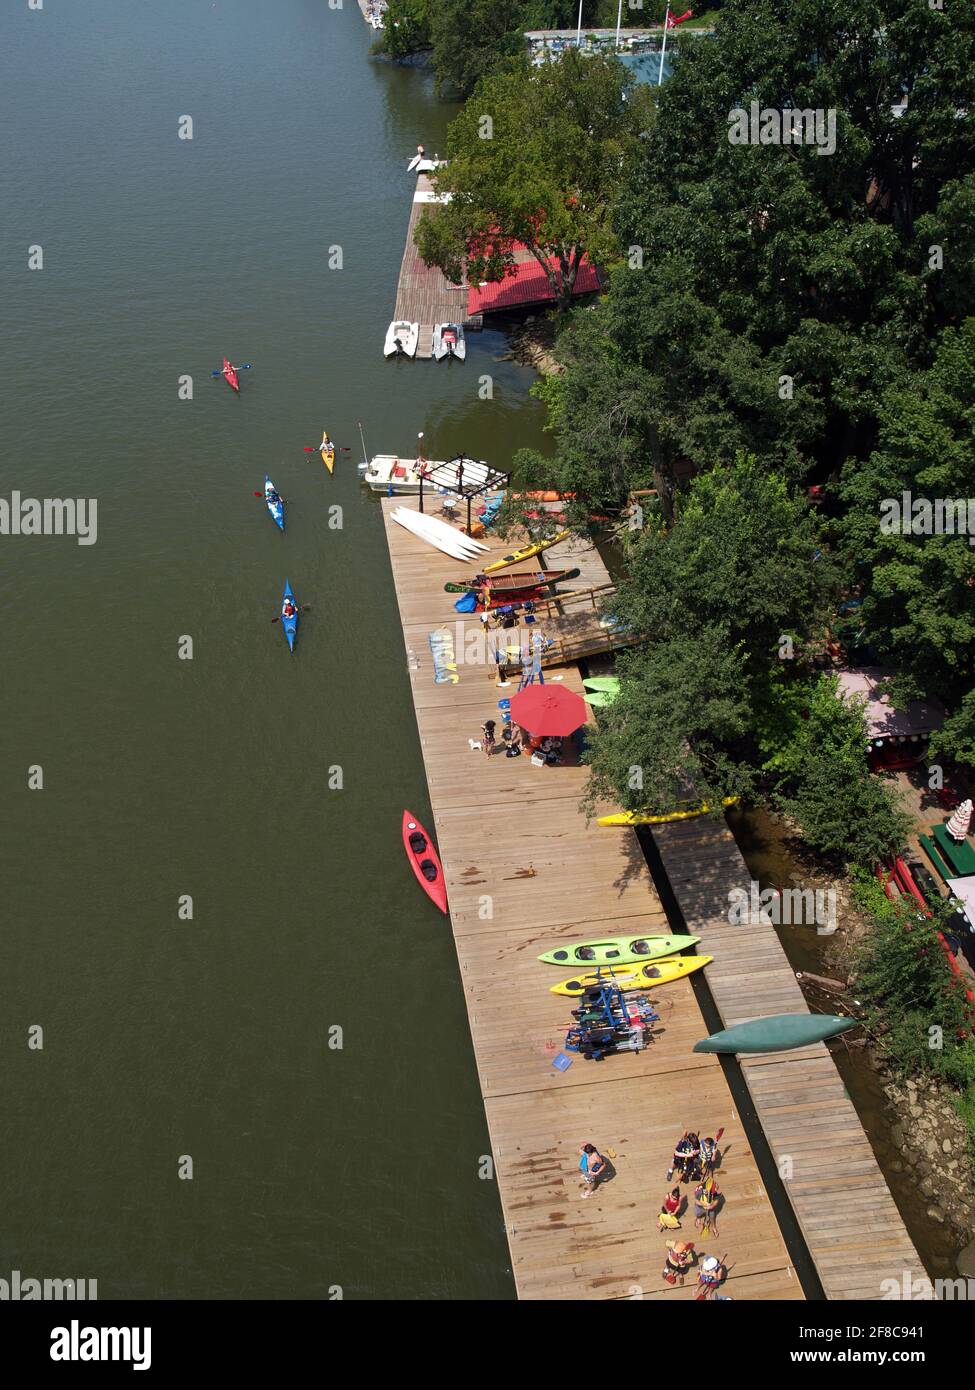 The Georgetown waterfront near Key Bridge over the Potomac River in Washington D.C. sports recreational canoeing and kayaking in the summer. Stock Photo